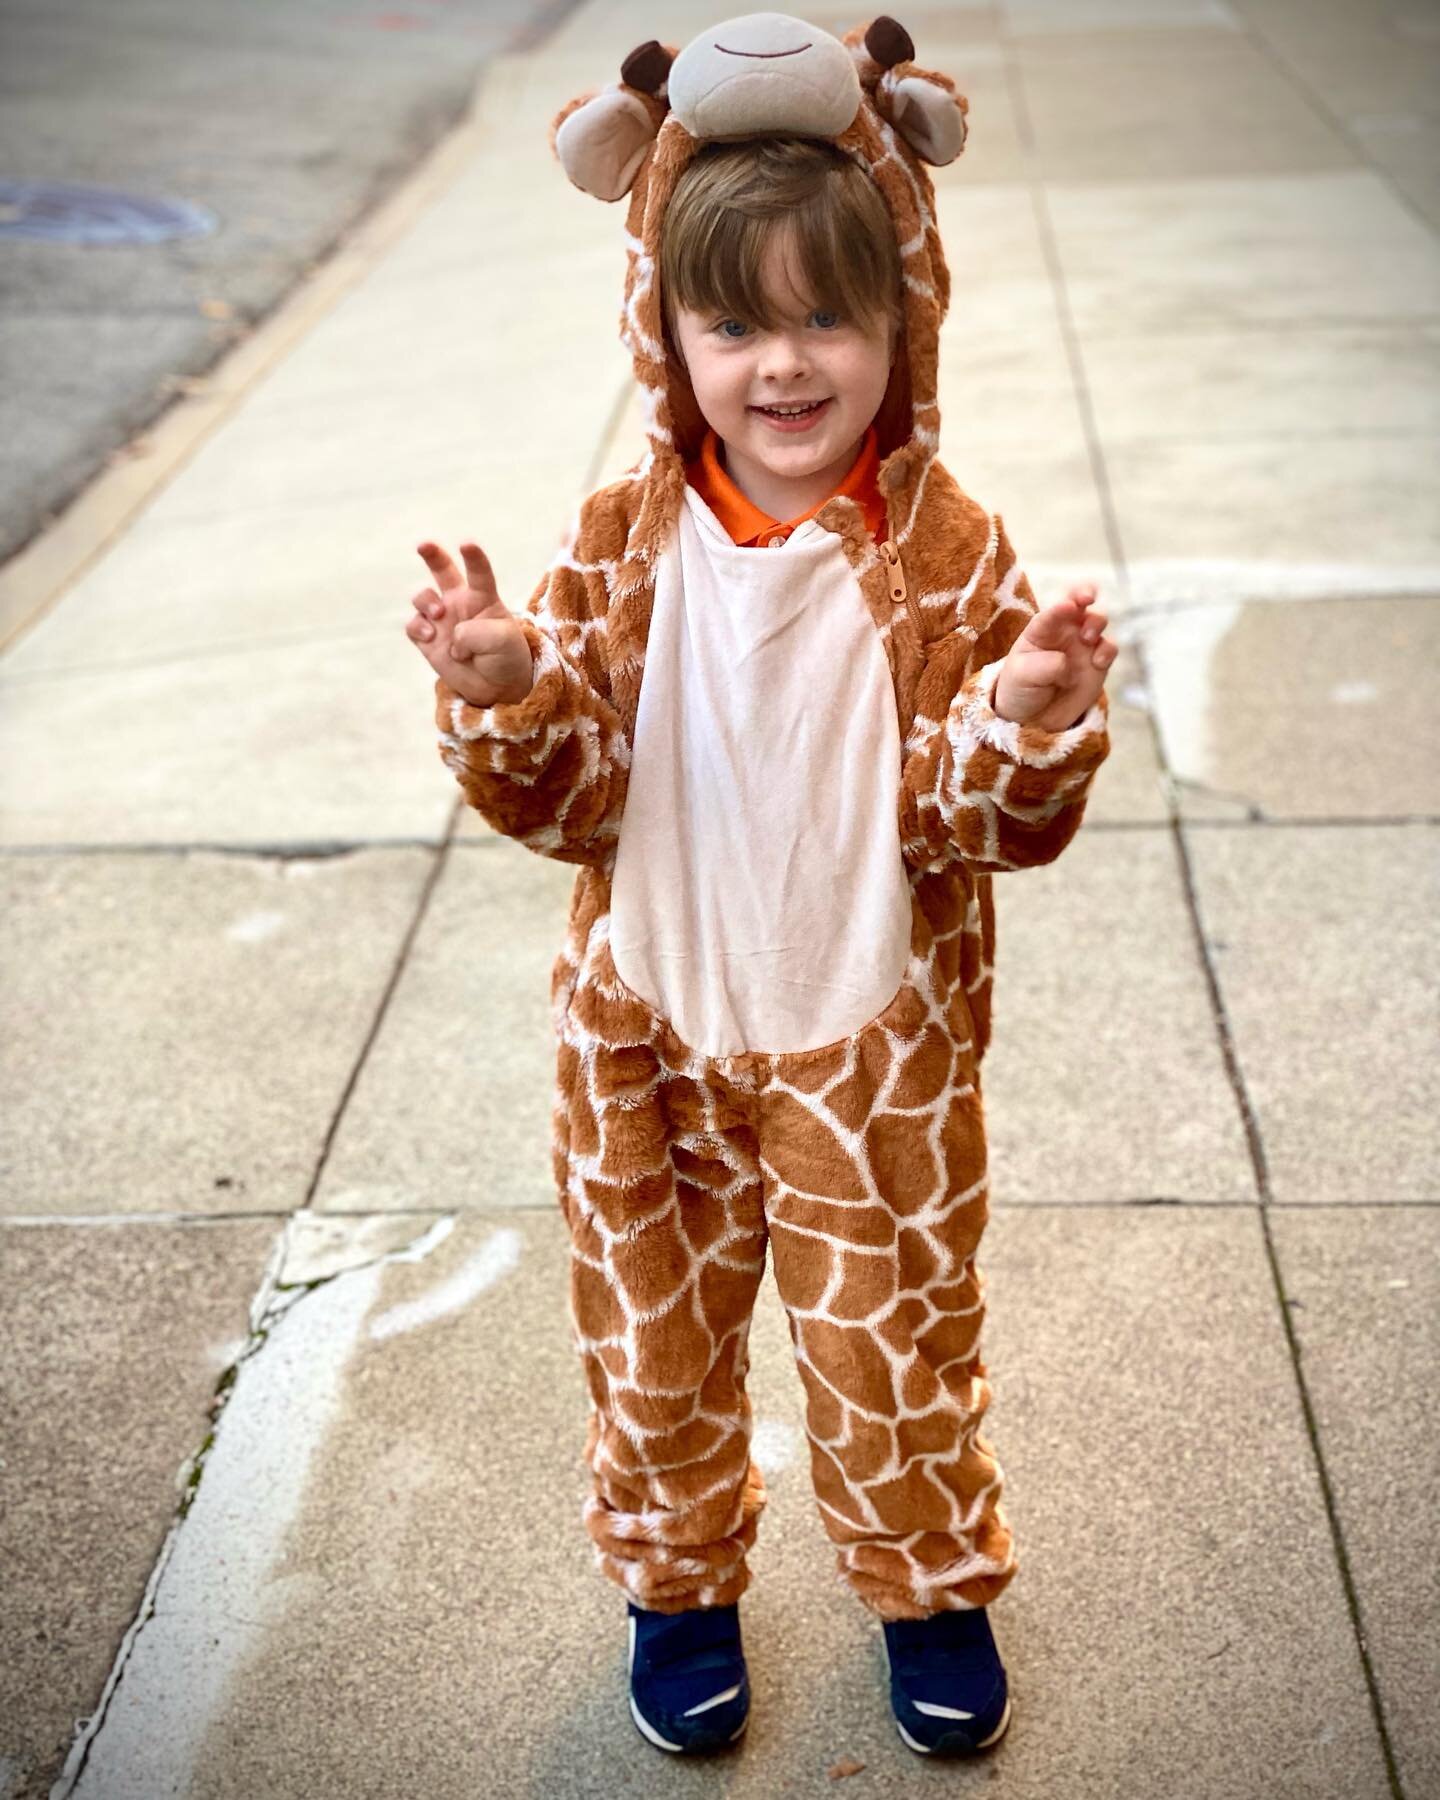 Giraffe is loose! Watch out Polk Street 🎃 The tricksters will be out and about looking for some treats today 👻 #BLB Beautified&rsquo;s big little boss is so excited for the school fun today 💕🥳 #sfpolkstreet #sfhalloween #discoverpolk 😍